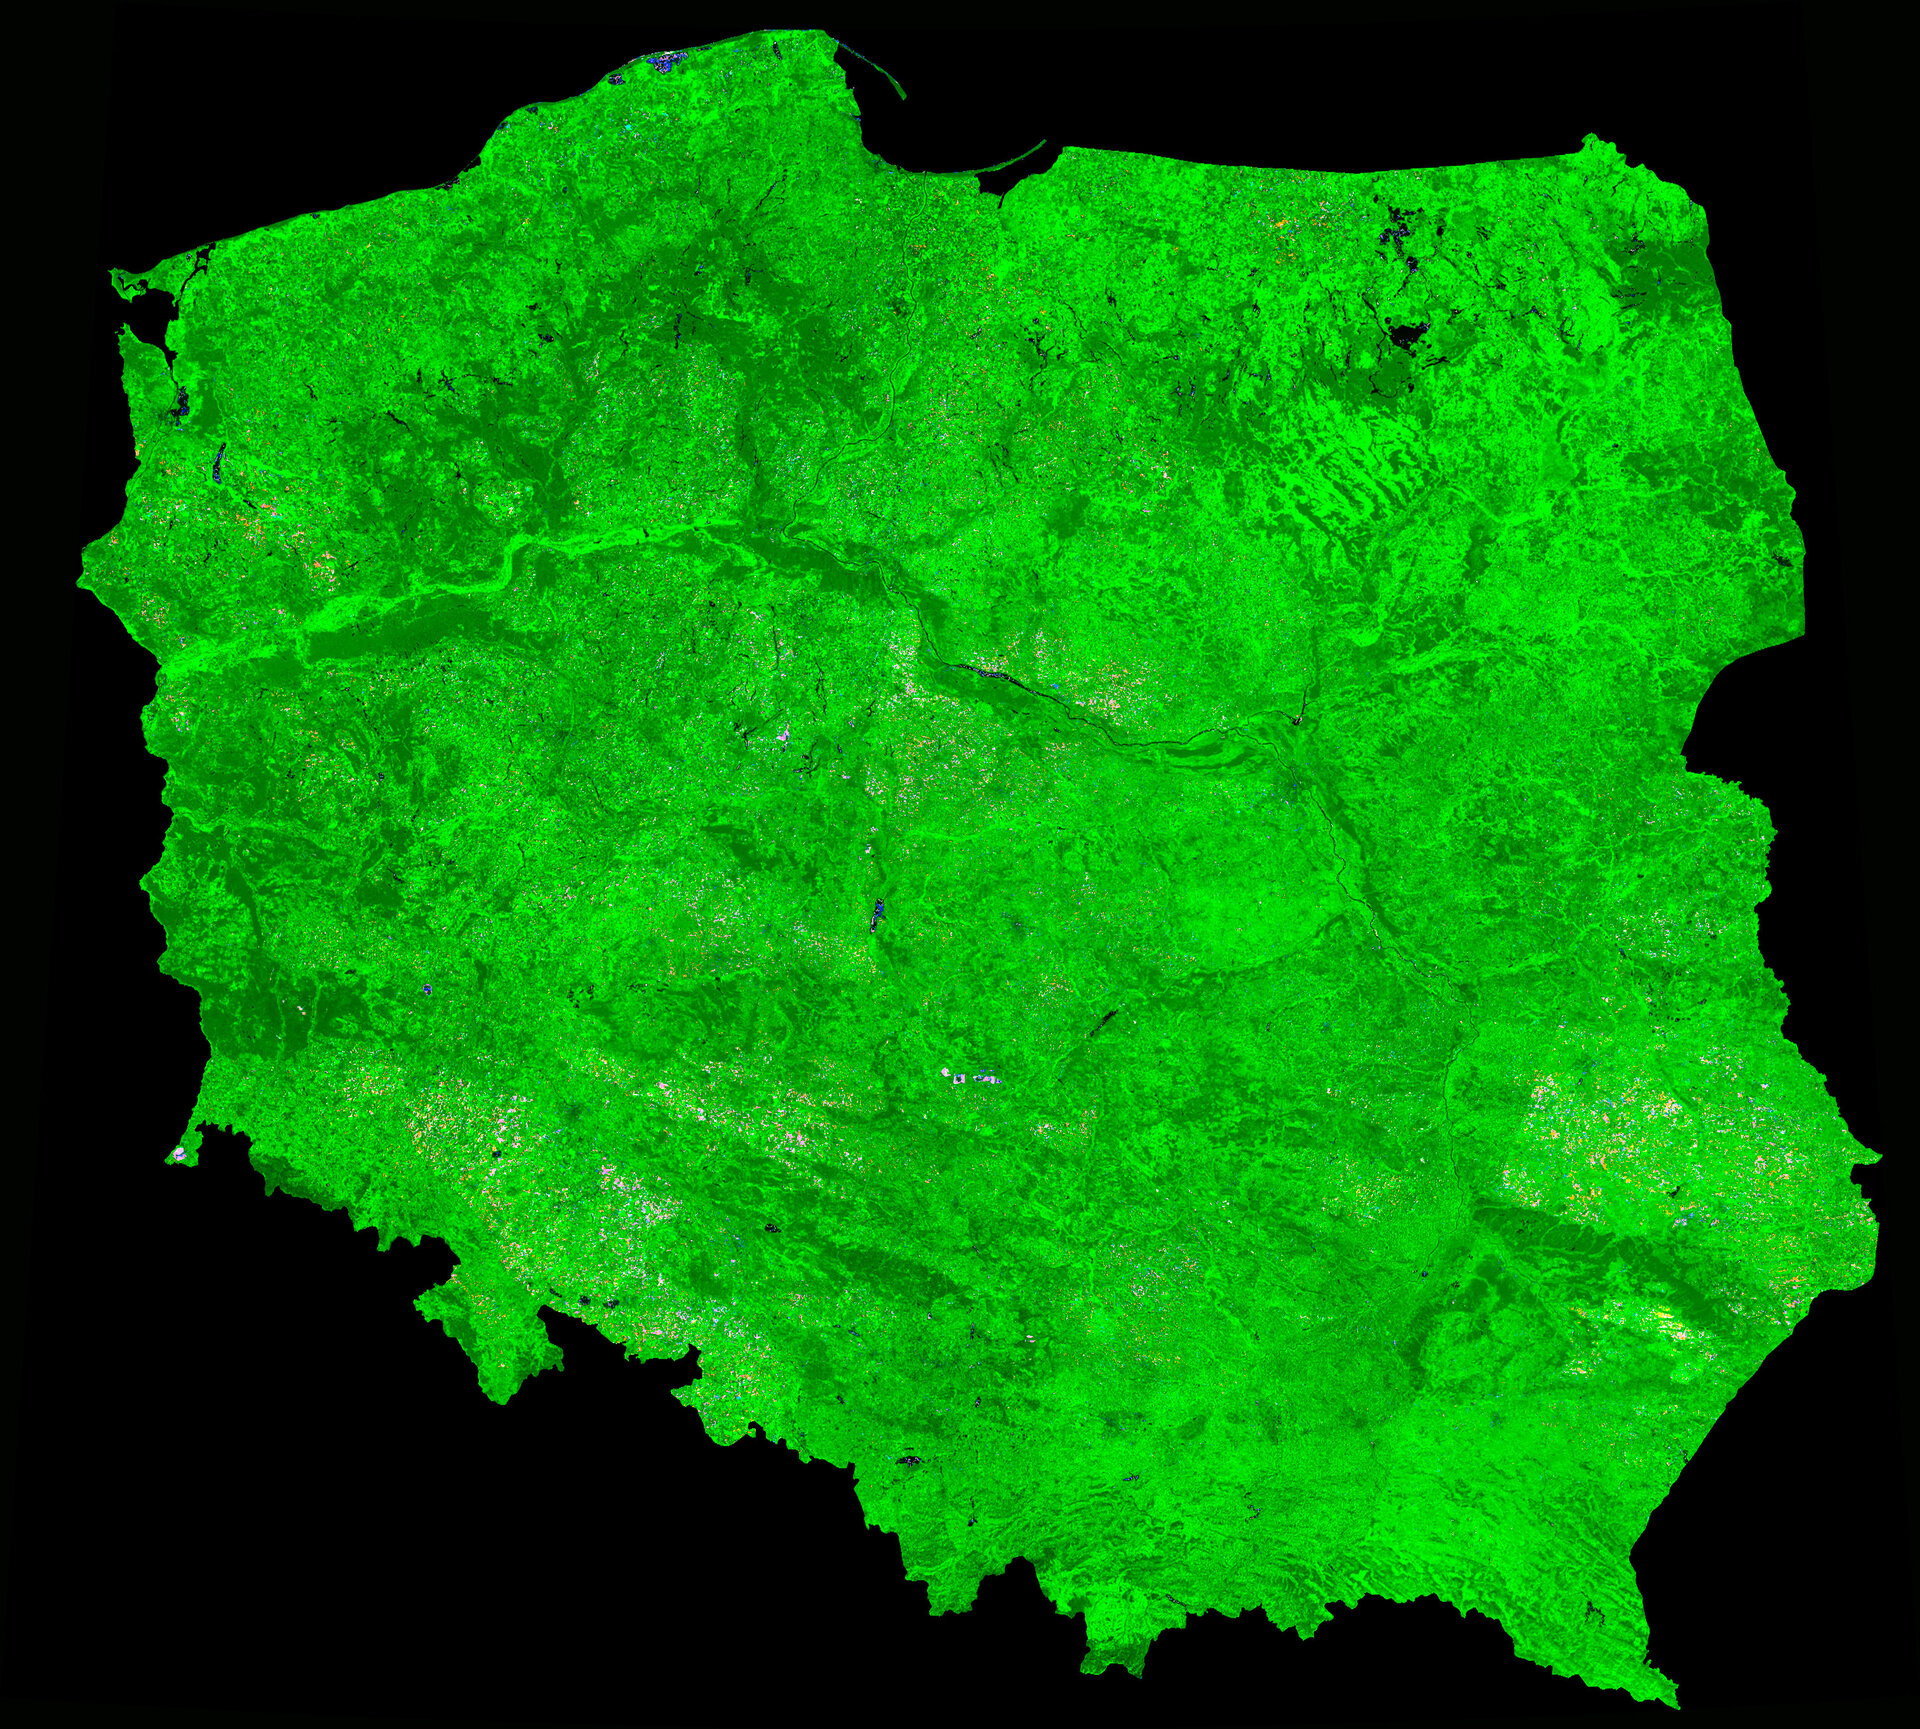 A cloud-free image of Poland, acquired by ESA's Proba-V satellite